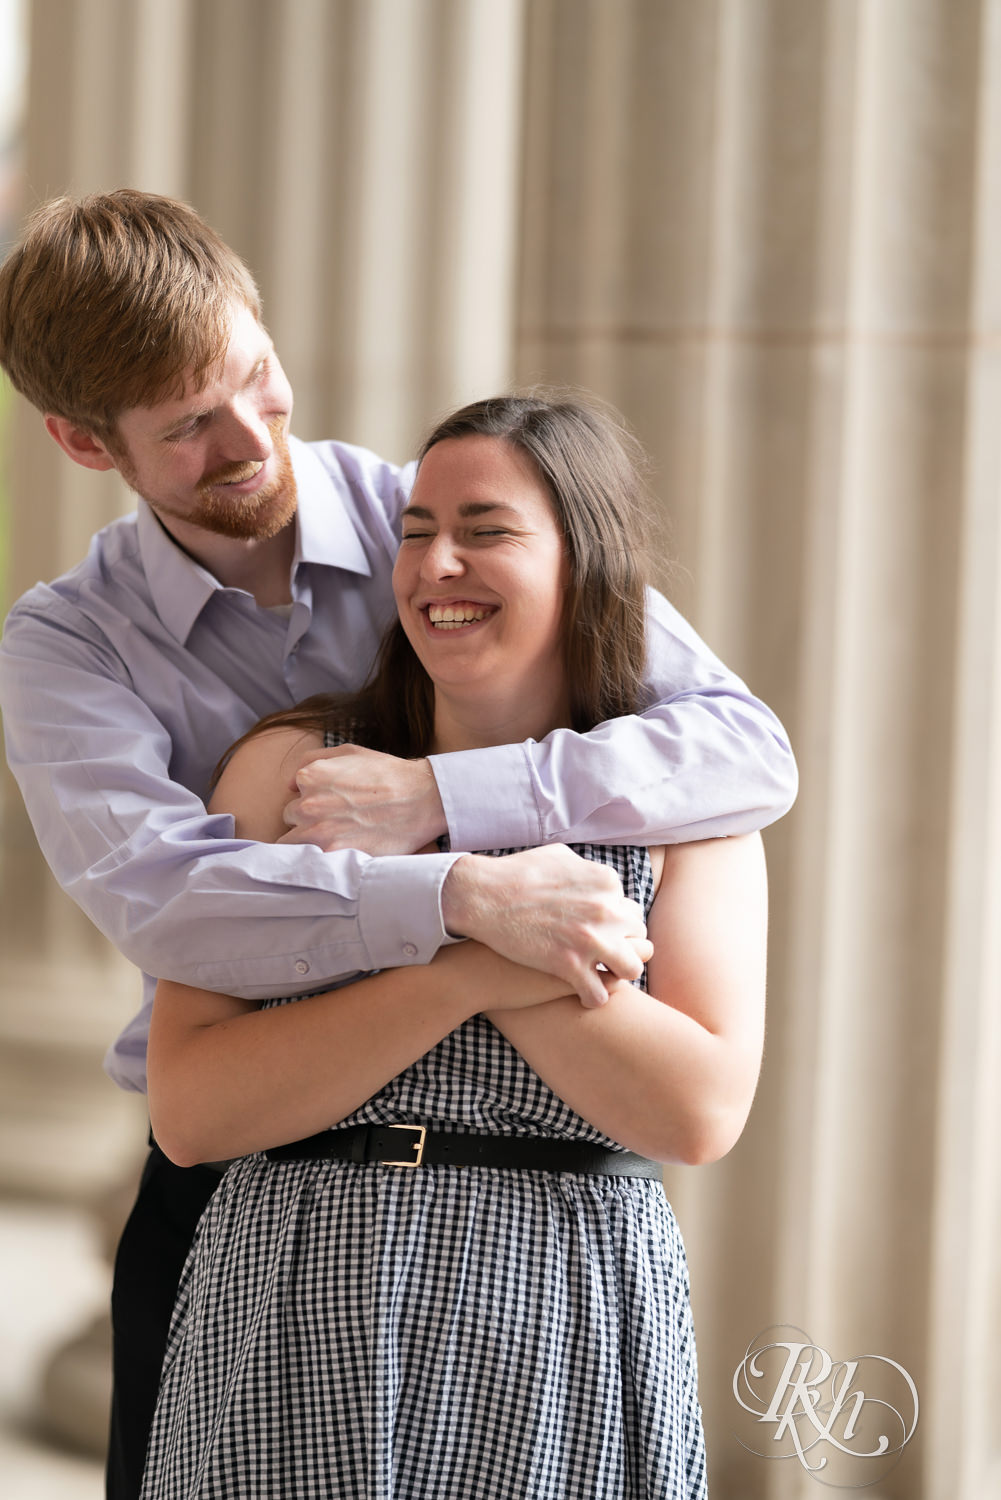 Man and woman laughing during engagement session at University of Minnesota.